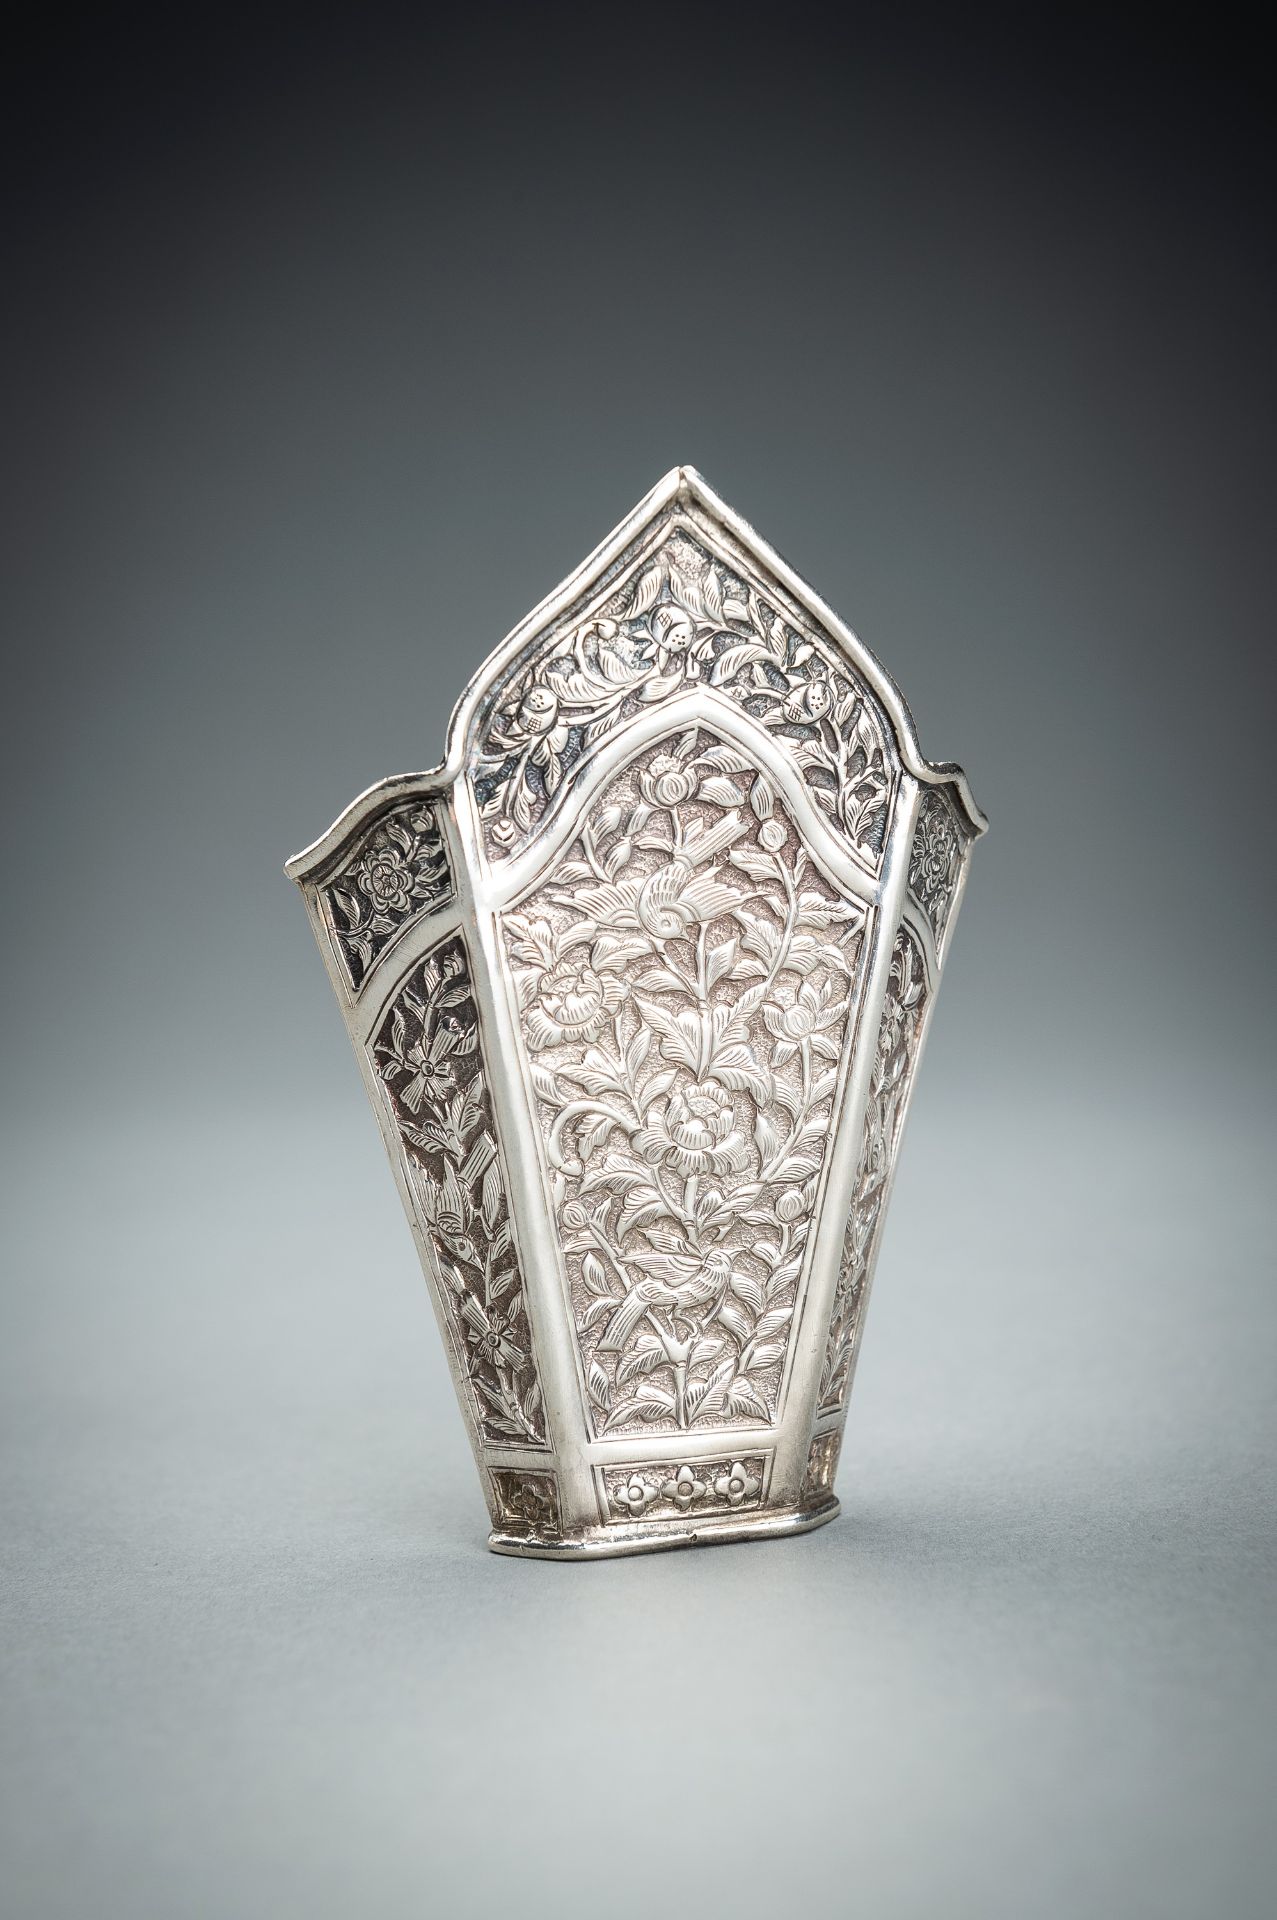 A GROUP OF FIVE EMBOSSED SILVER BETEL LEAF HOLDERS, c. 1900s - Image 11 of 19